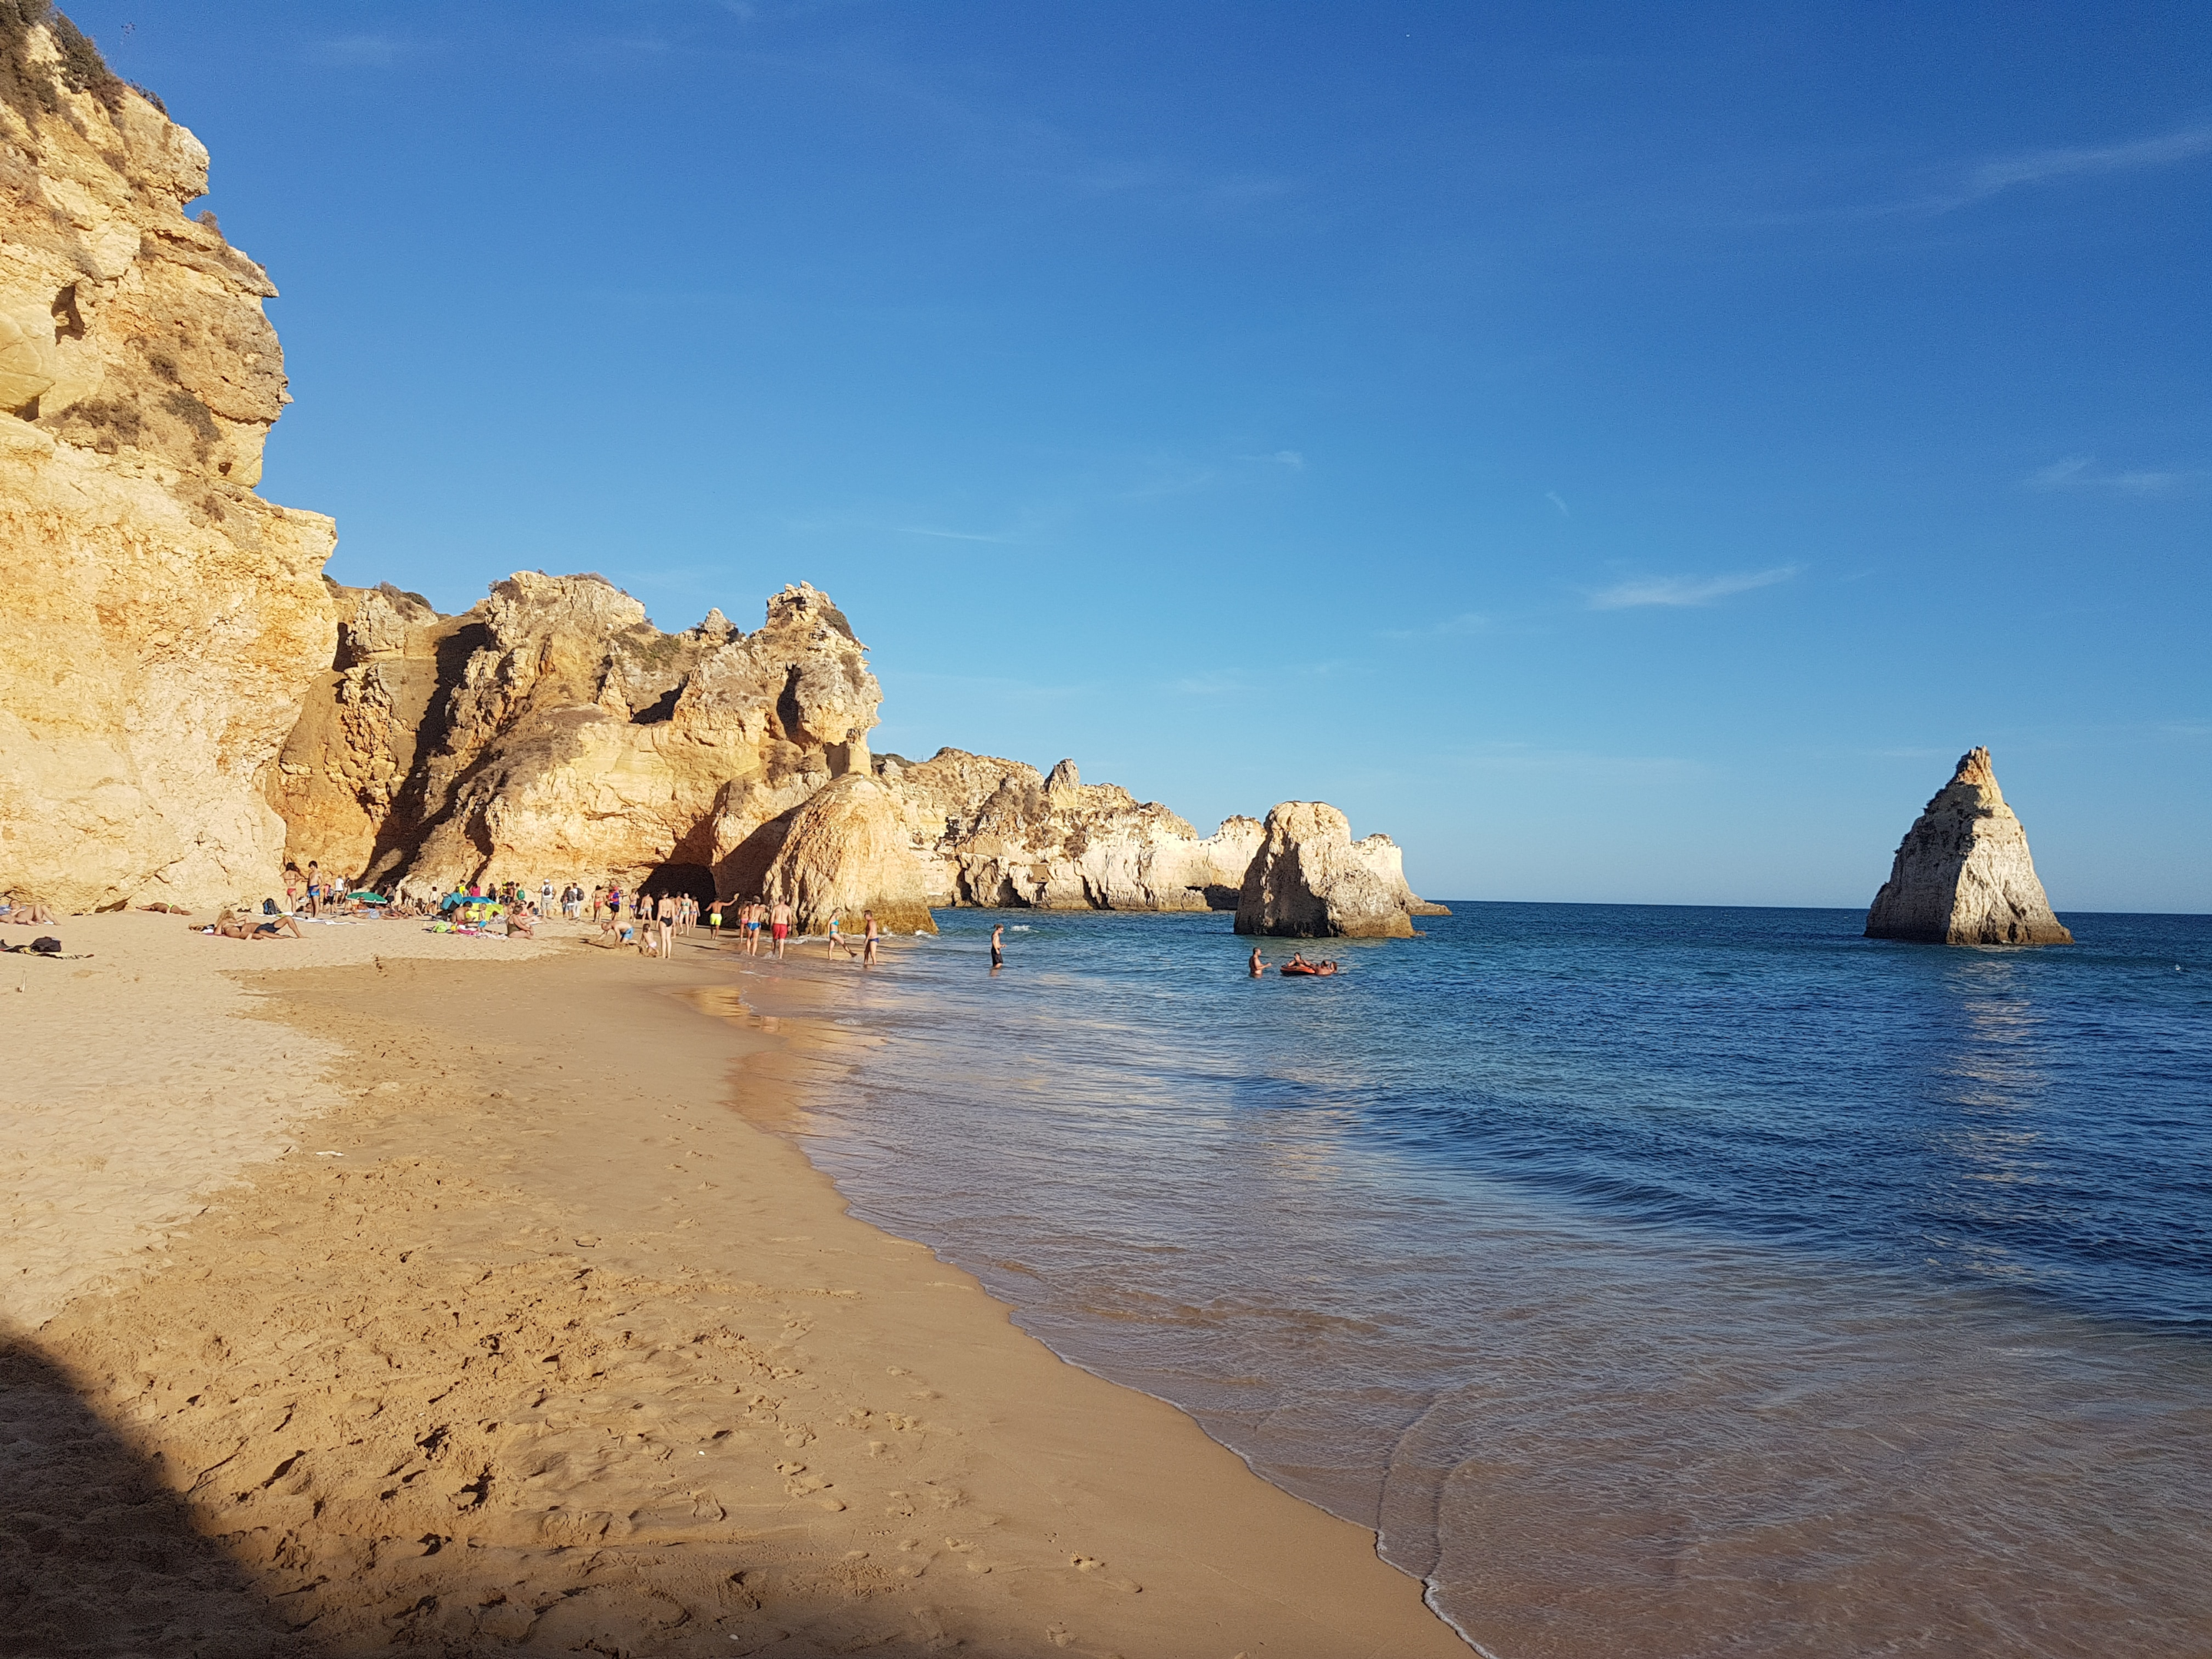 A stunning view of winter in Algarve at one of the beautiful beaches in the region.